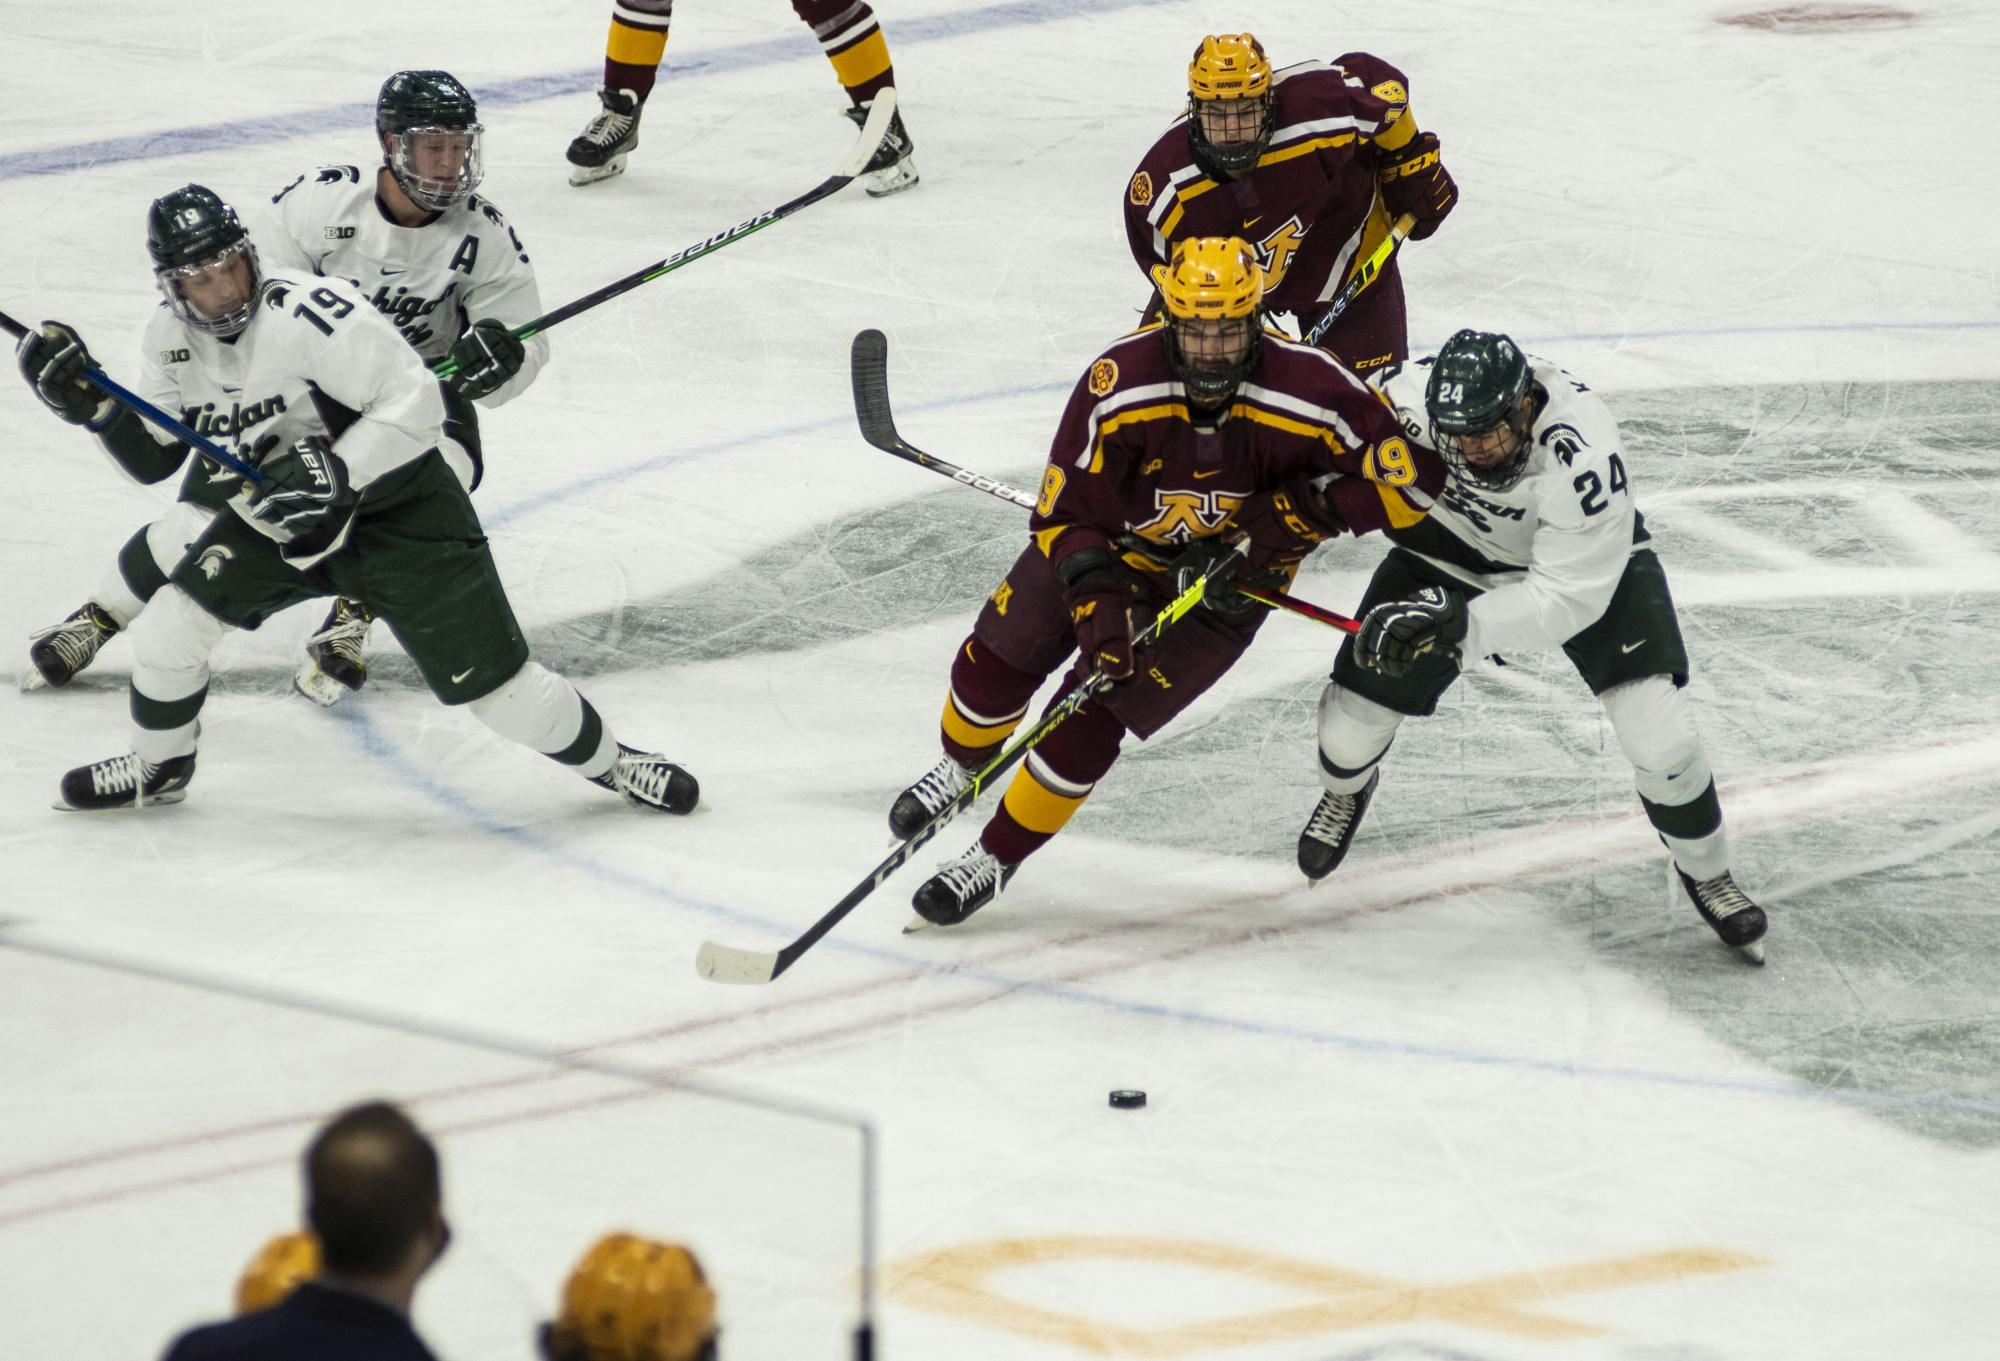 <p>Senior forward Austin Kamer (24) skates towards the puck after a face-off in the second period. The Spartans fell to the Golden Gophers, 3-1, on Dec. 3, 2020.</p>